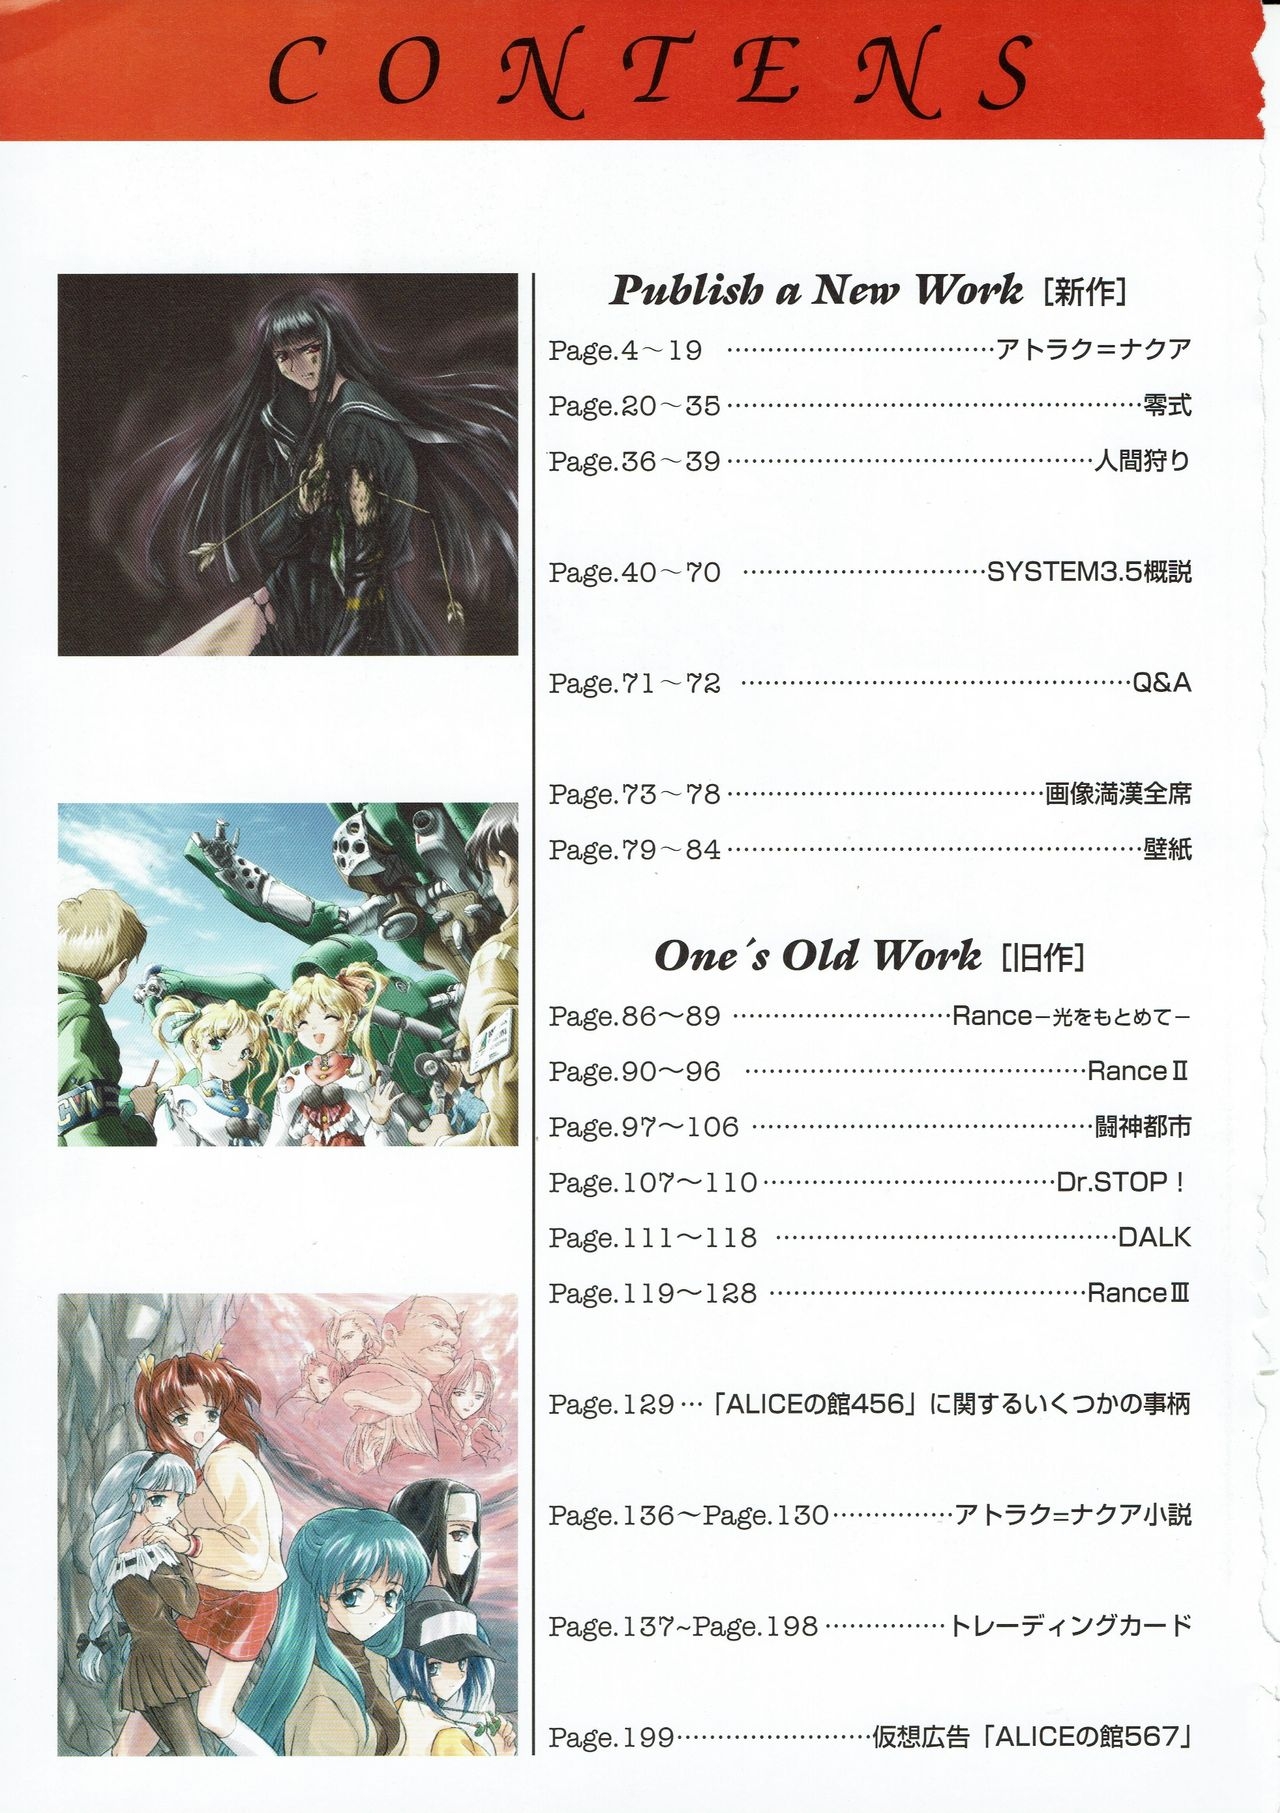 Alice no Yakata 456 Official Guide 3